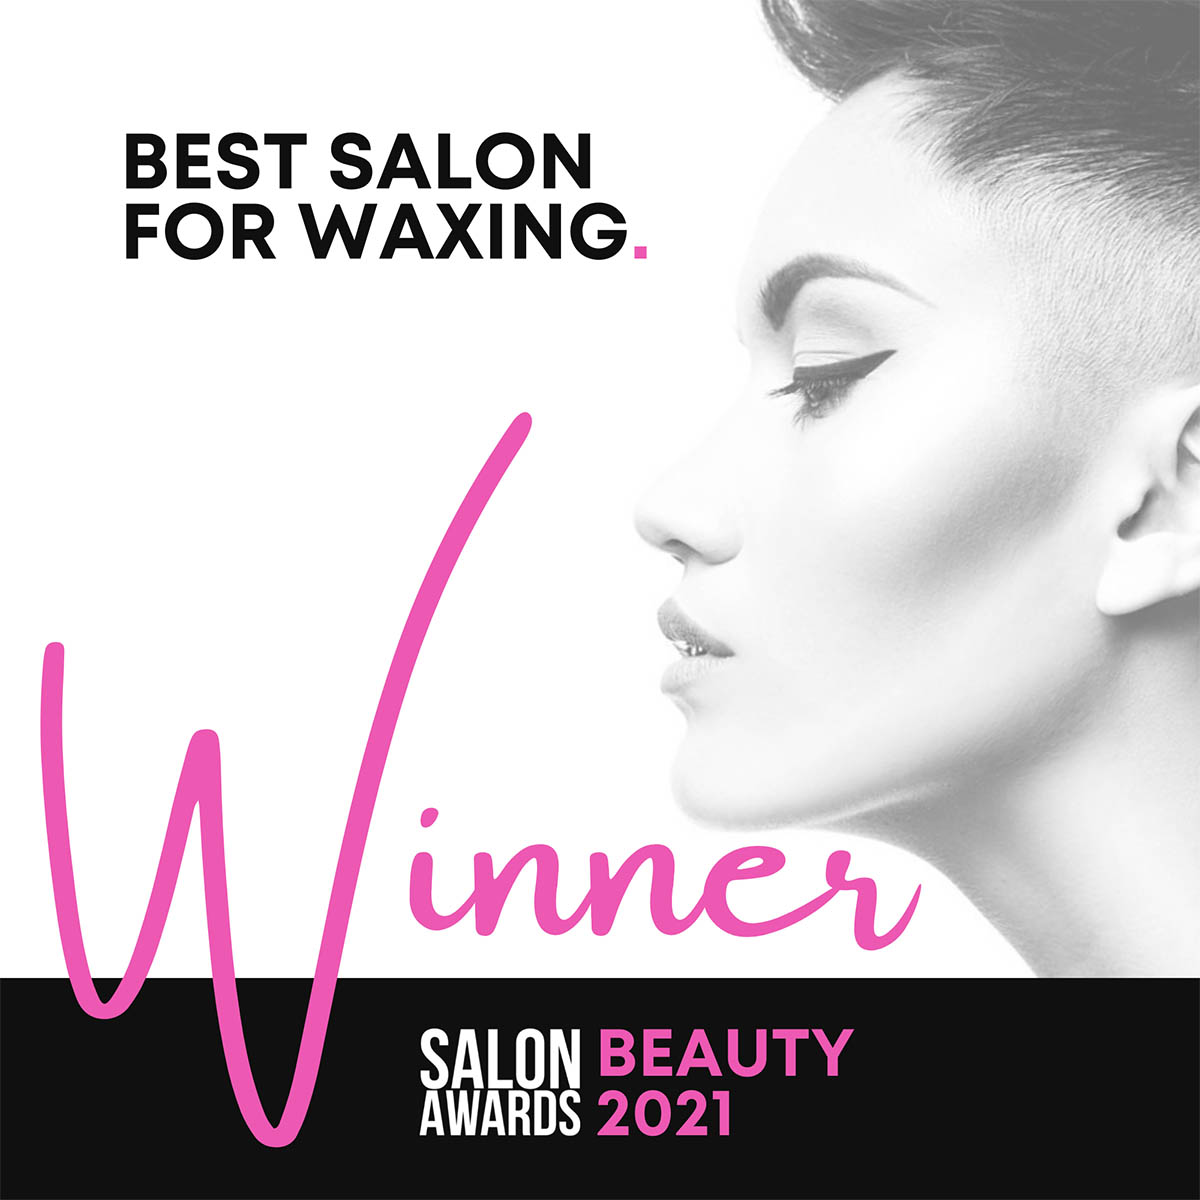 Best Salon for Waxing